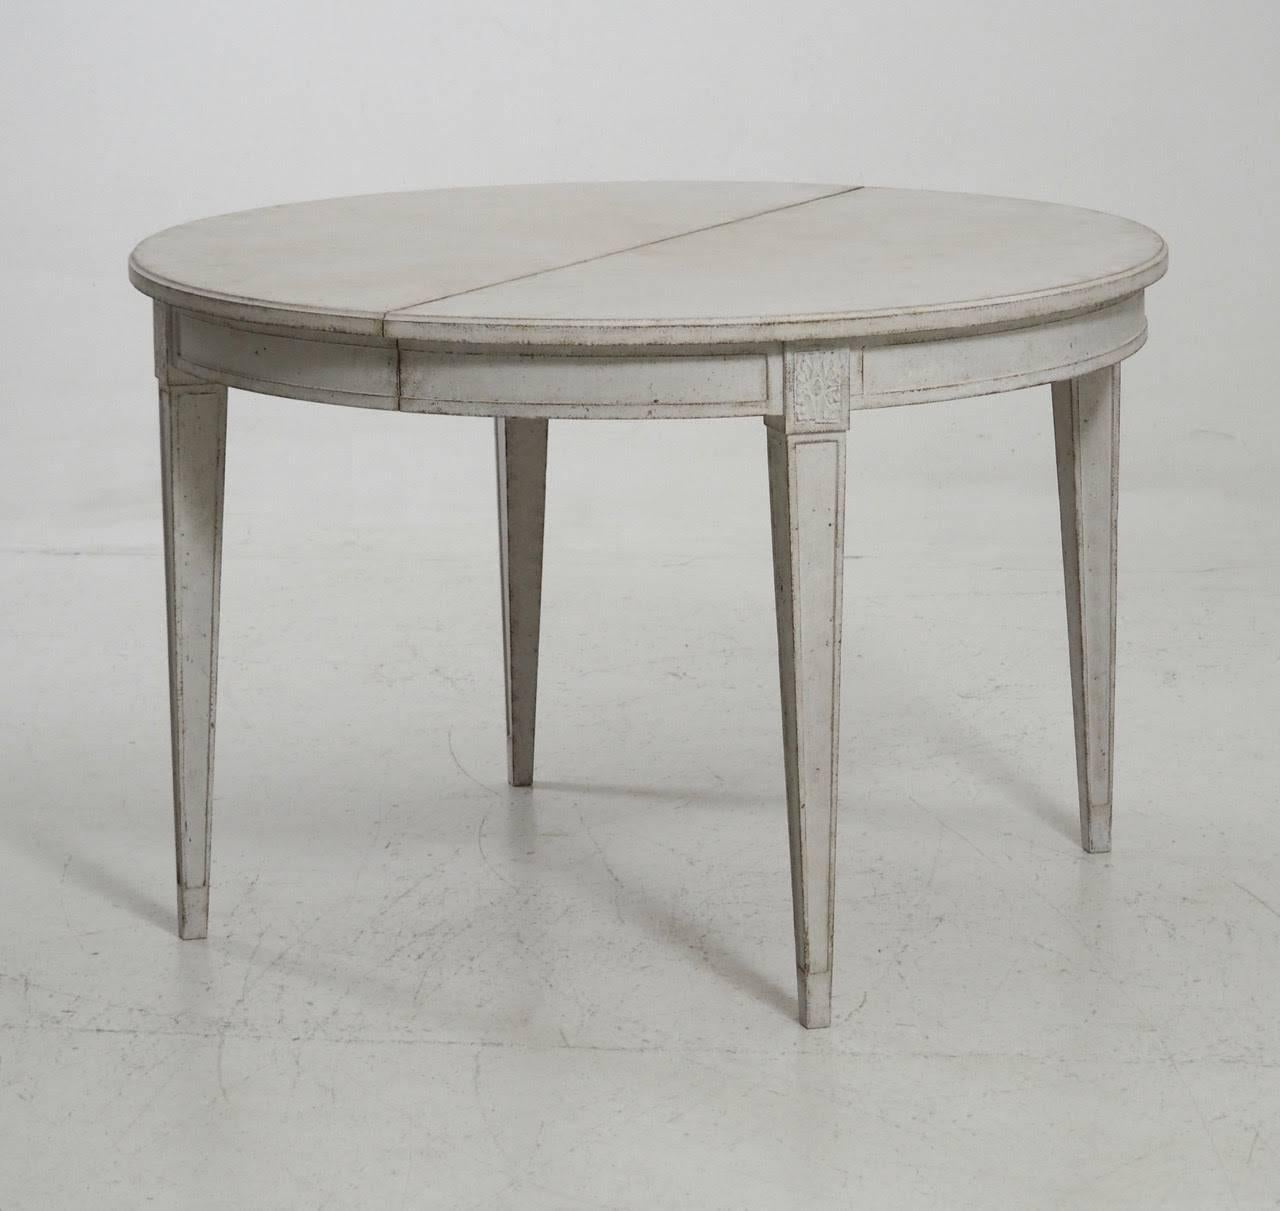 A stunning Swedish three-leaf extension dining table in the Gustavian style with square tapered legs accented by carved rosettes. A beautiful and versatile dining table that can extend with one, two or three leaves. 

Measures: Table diameter